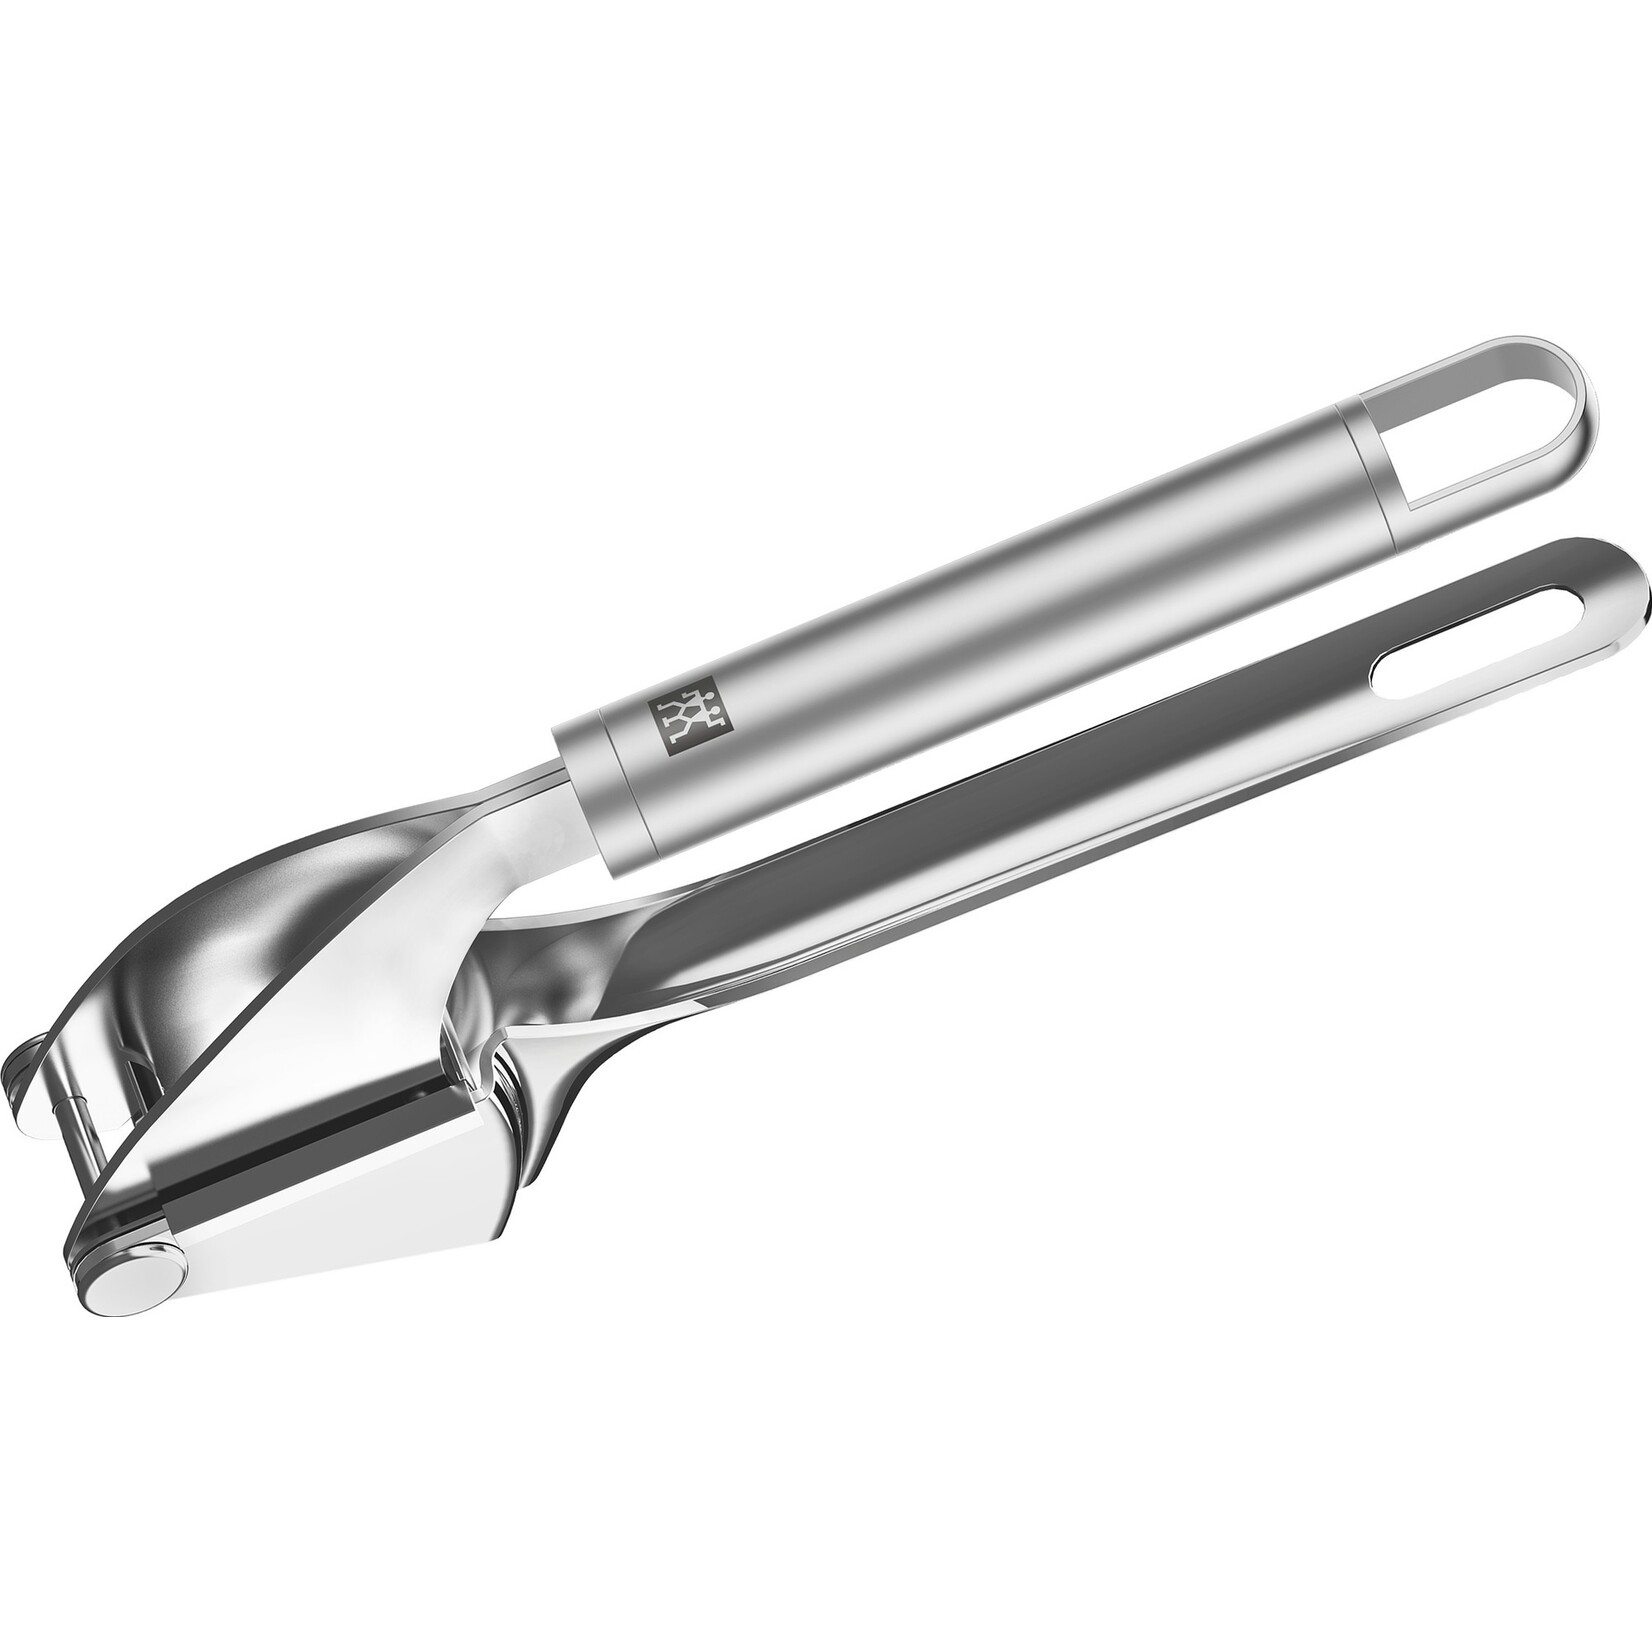 Zwilling Zwilling Pro knoflookpers